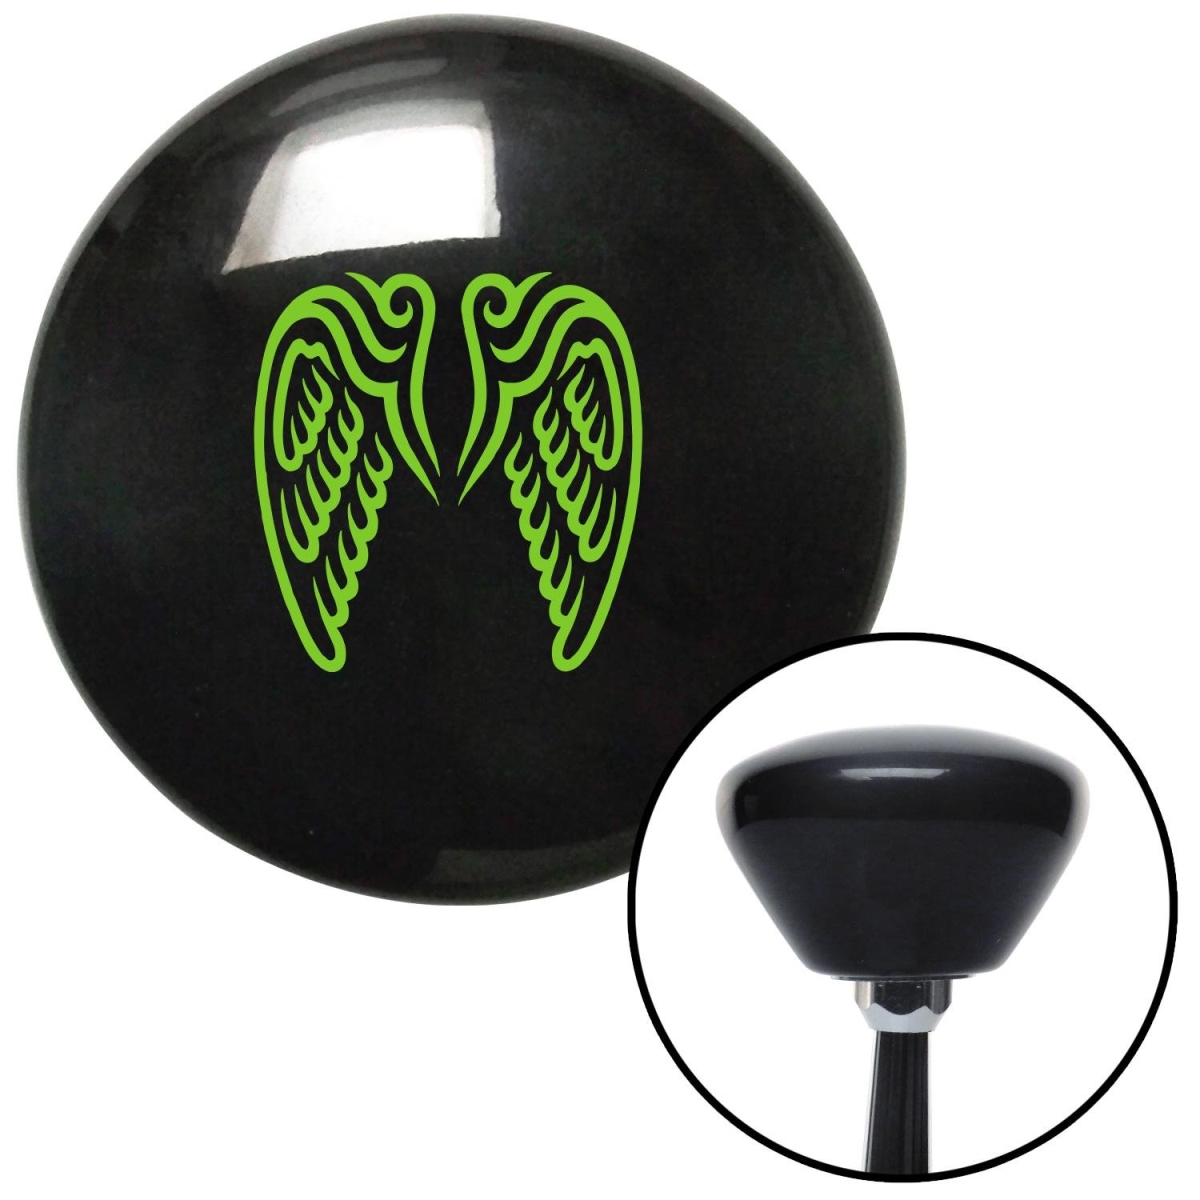 American Shifter 144722 Green Angel Wings Black Retro Shift Knob with M16 x 1.5 Insert Shifter Auto Manual Brody -  American Shifter Company